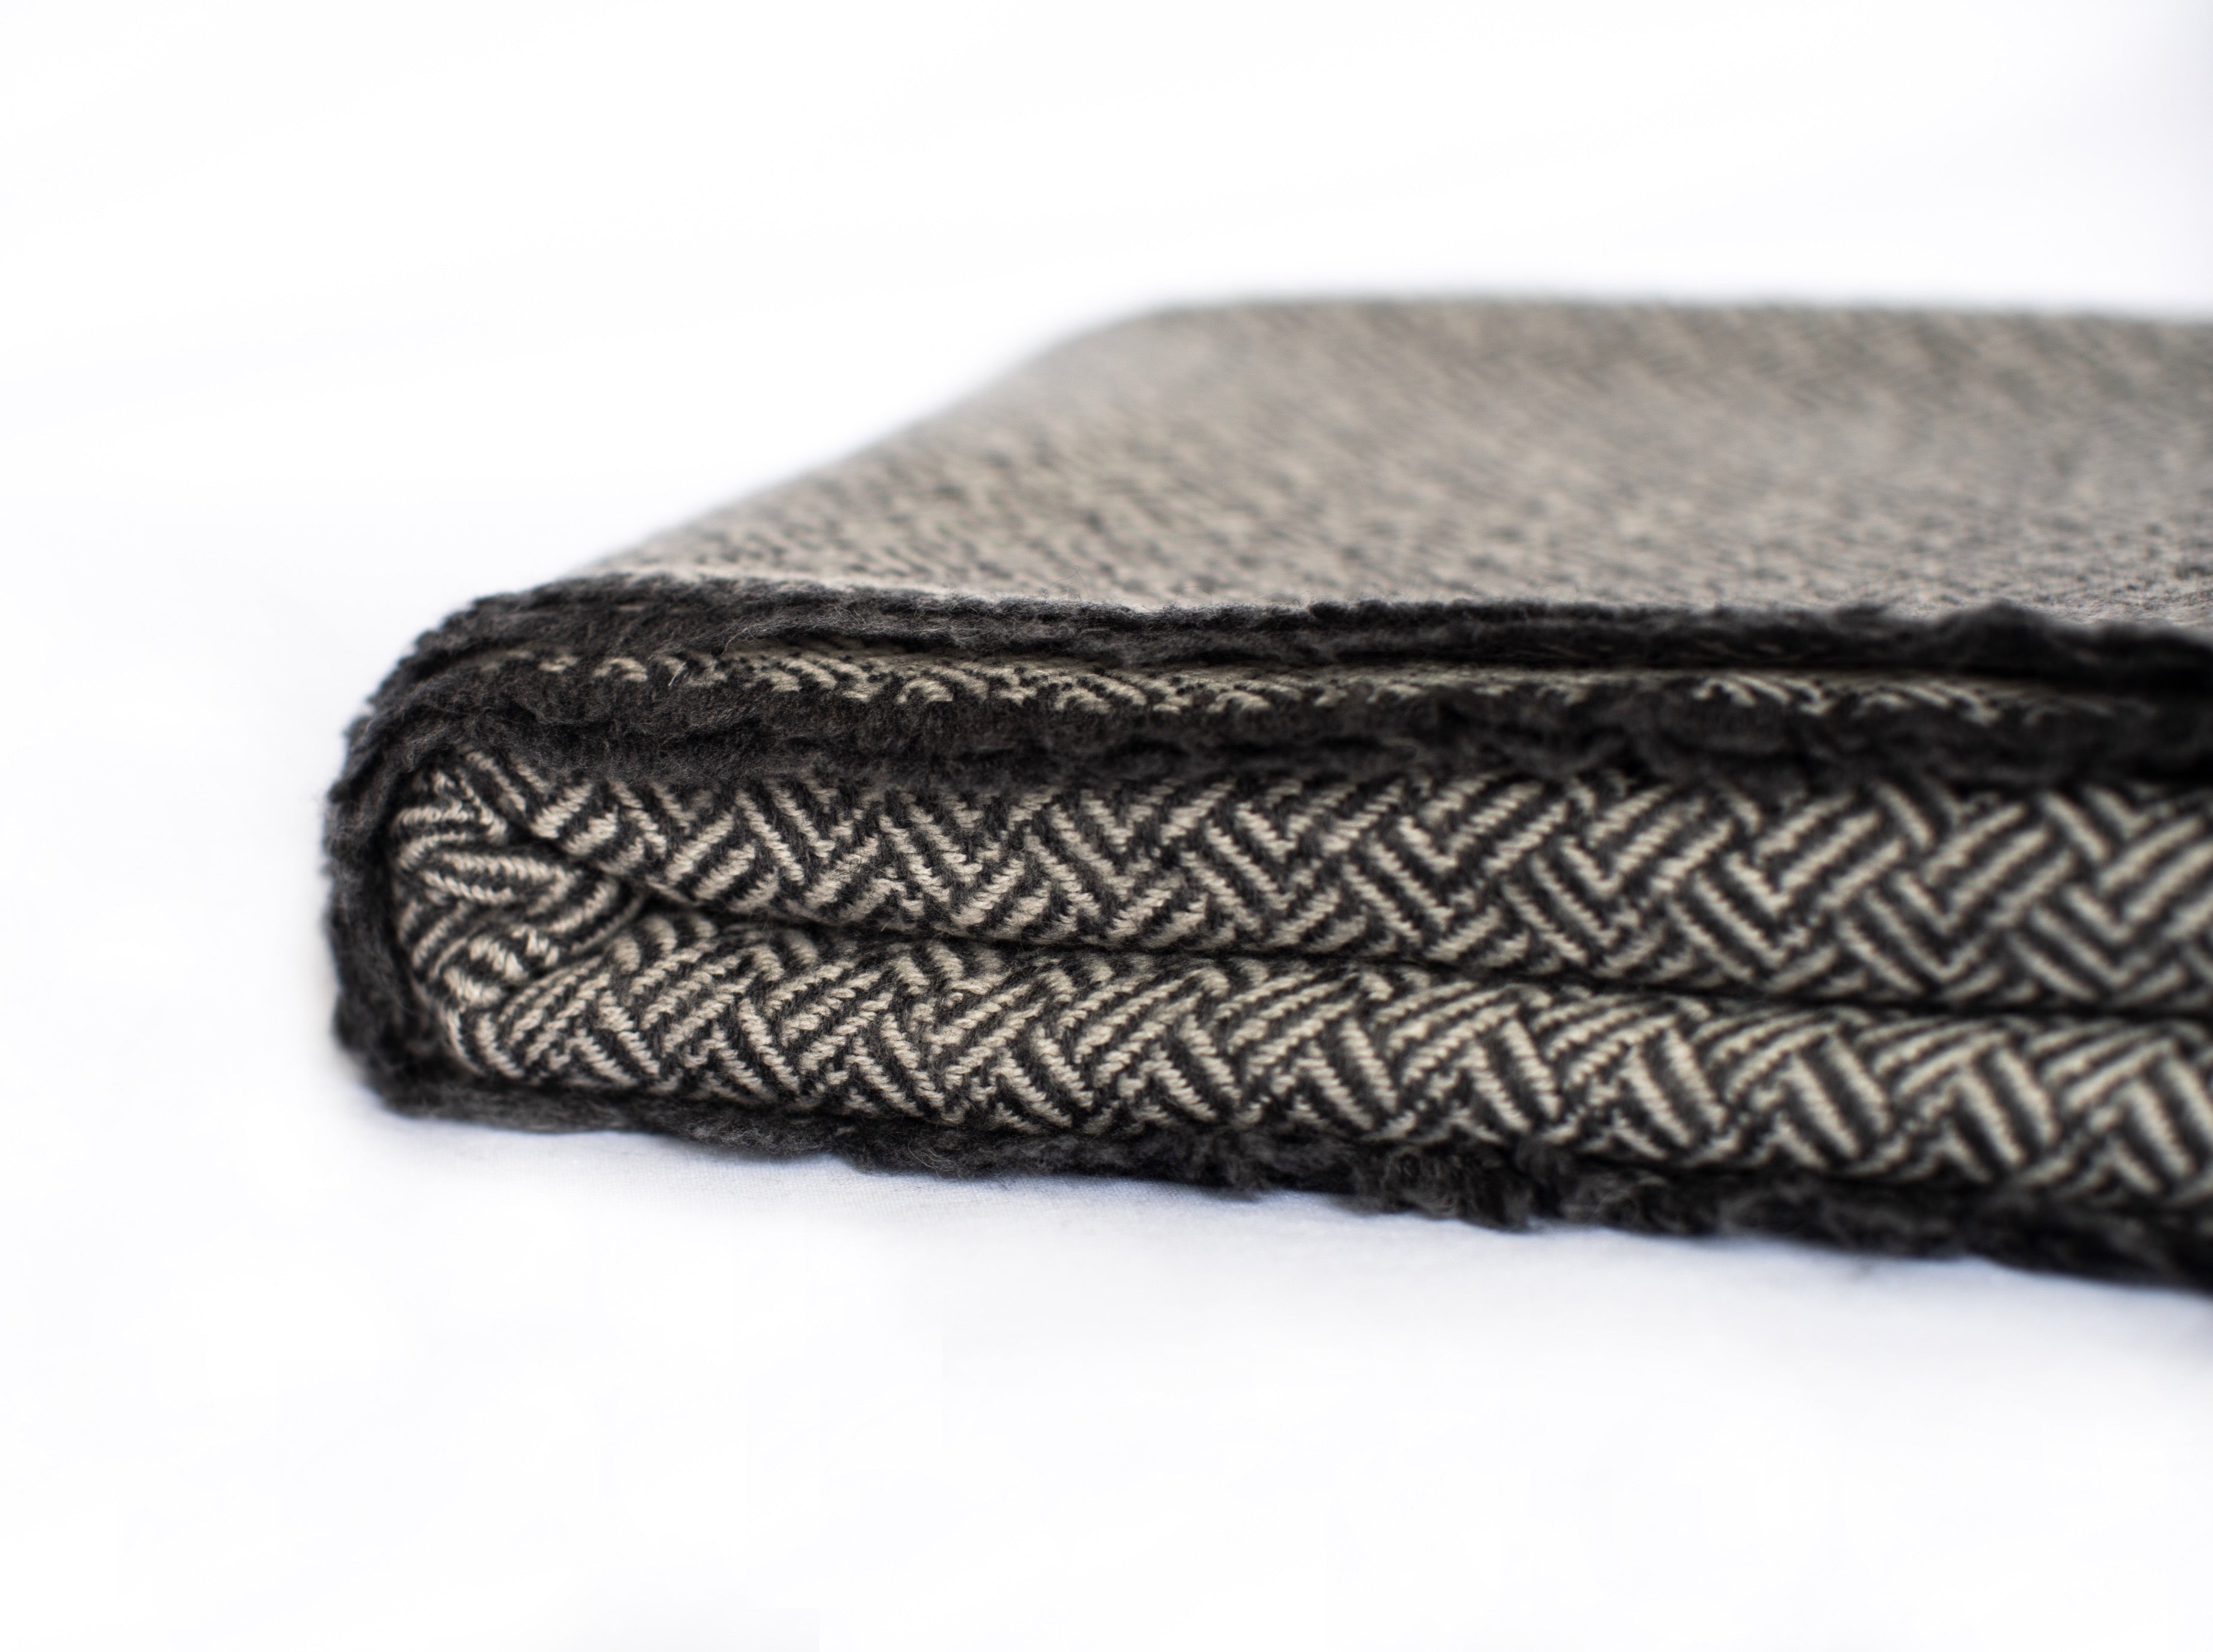 Himalayan Cashmere Throw Blanklet - Black Plaids